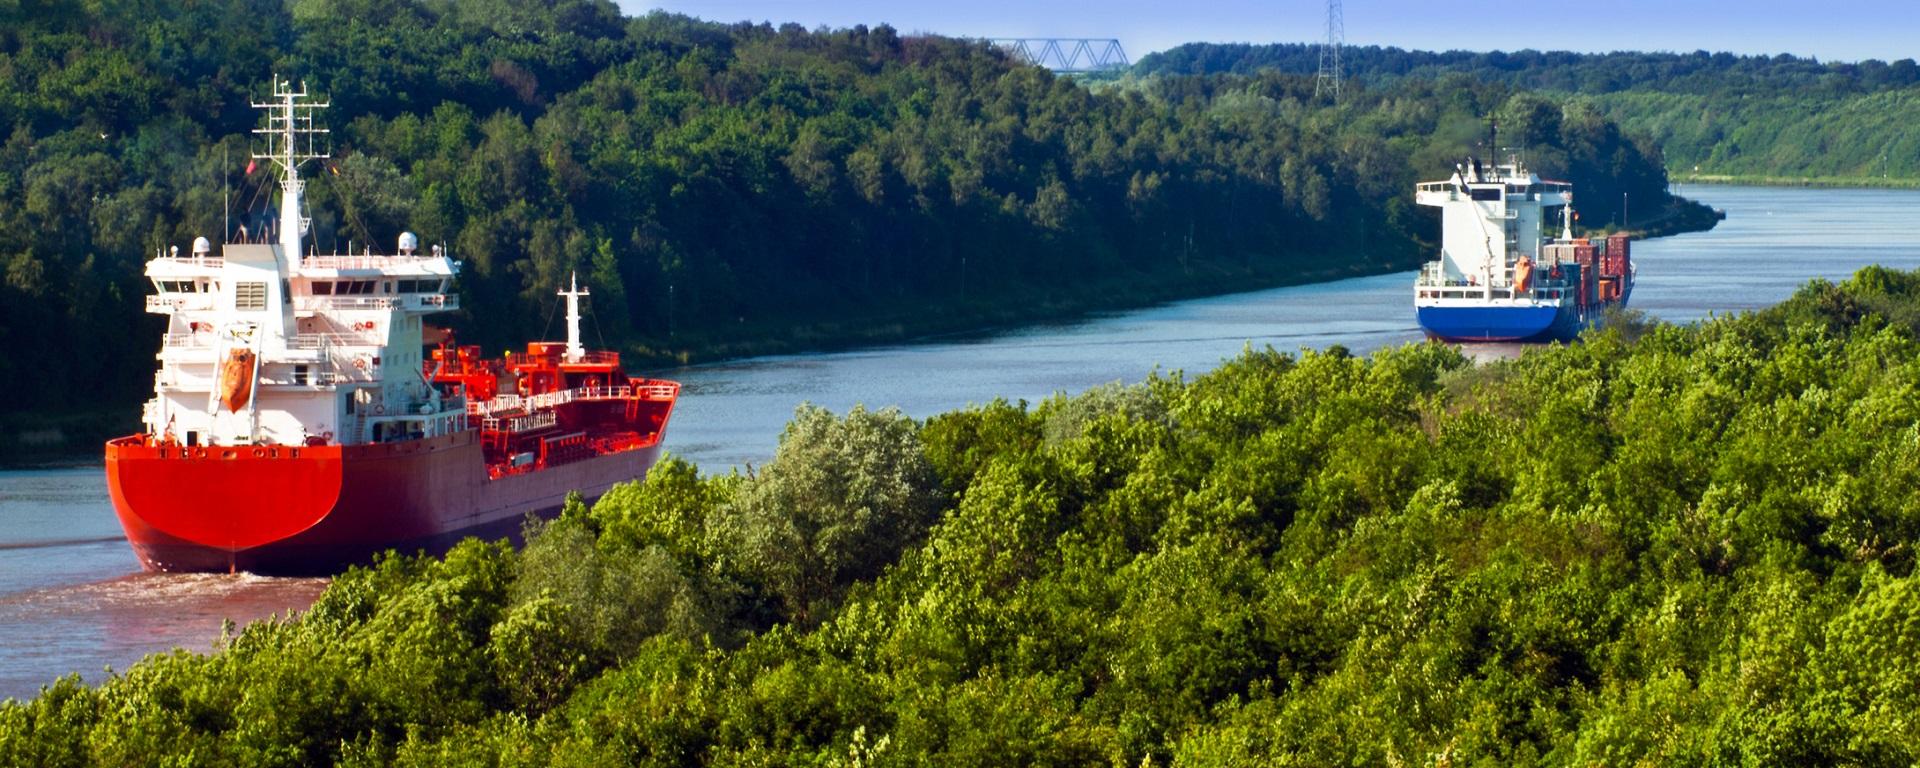 One of the measures stipulated in the FTIP is the deepening of the Kiel Canal. Source: Fotolia/PhotoSG